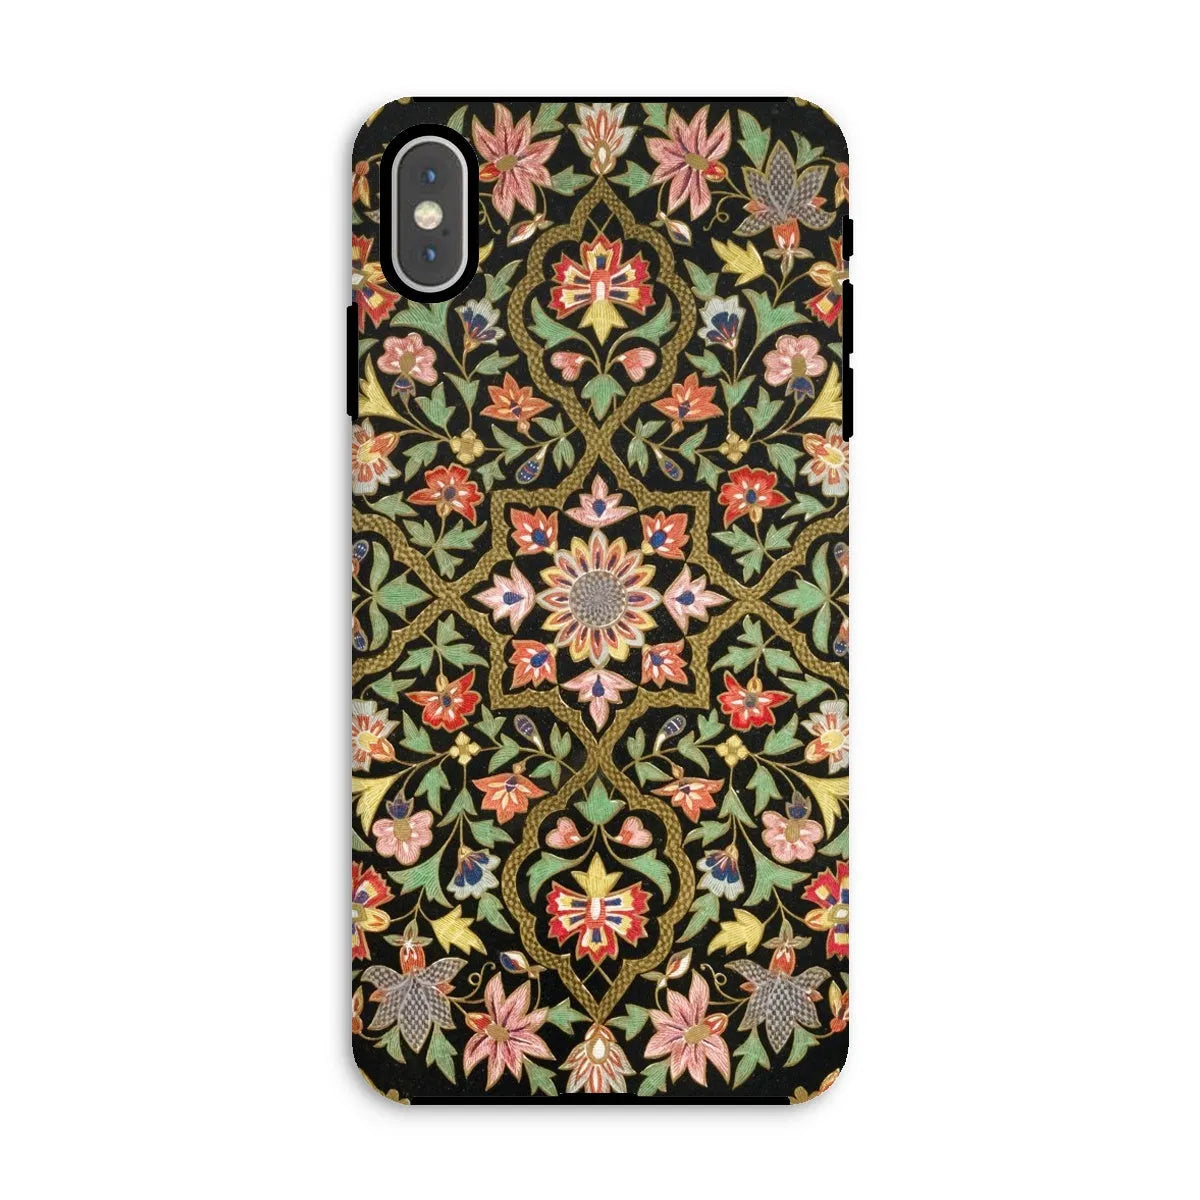 Indian Embroidery - Aesthetic Pattern Art Phone Case - Iphone Xs Max / Matte - Mobile Phone Cases - Aesthetic Art